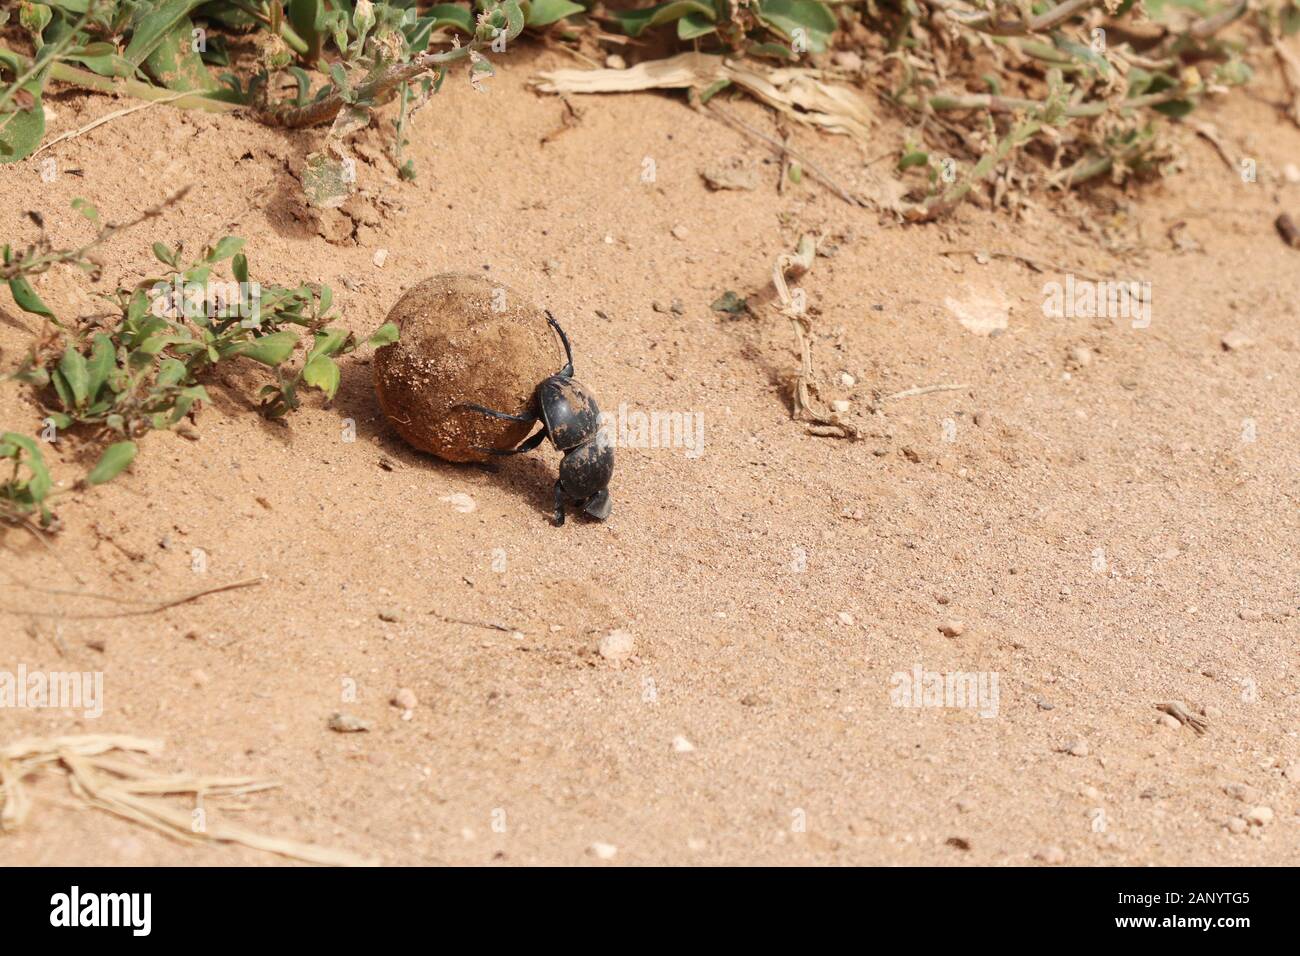 High angle shot of a black dung beetle carrying a road piece of mud near the plants Stock Photo